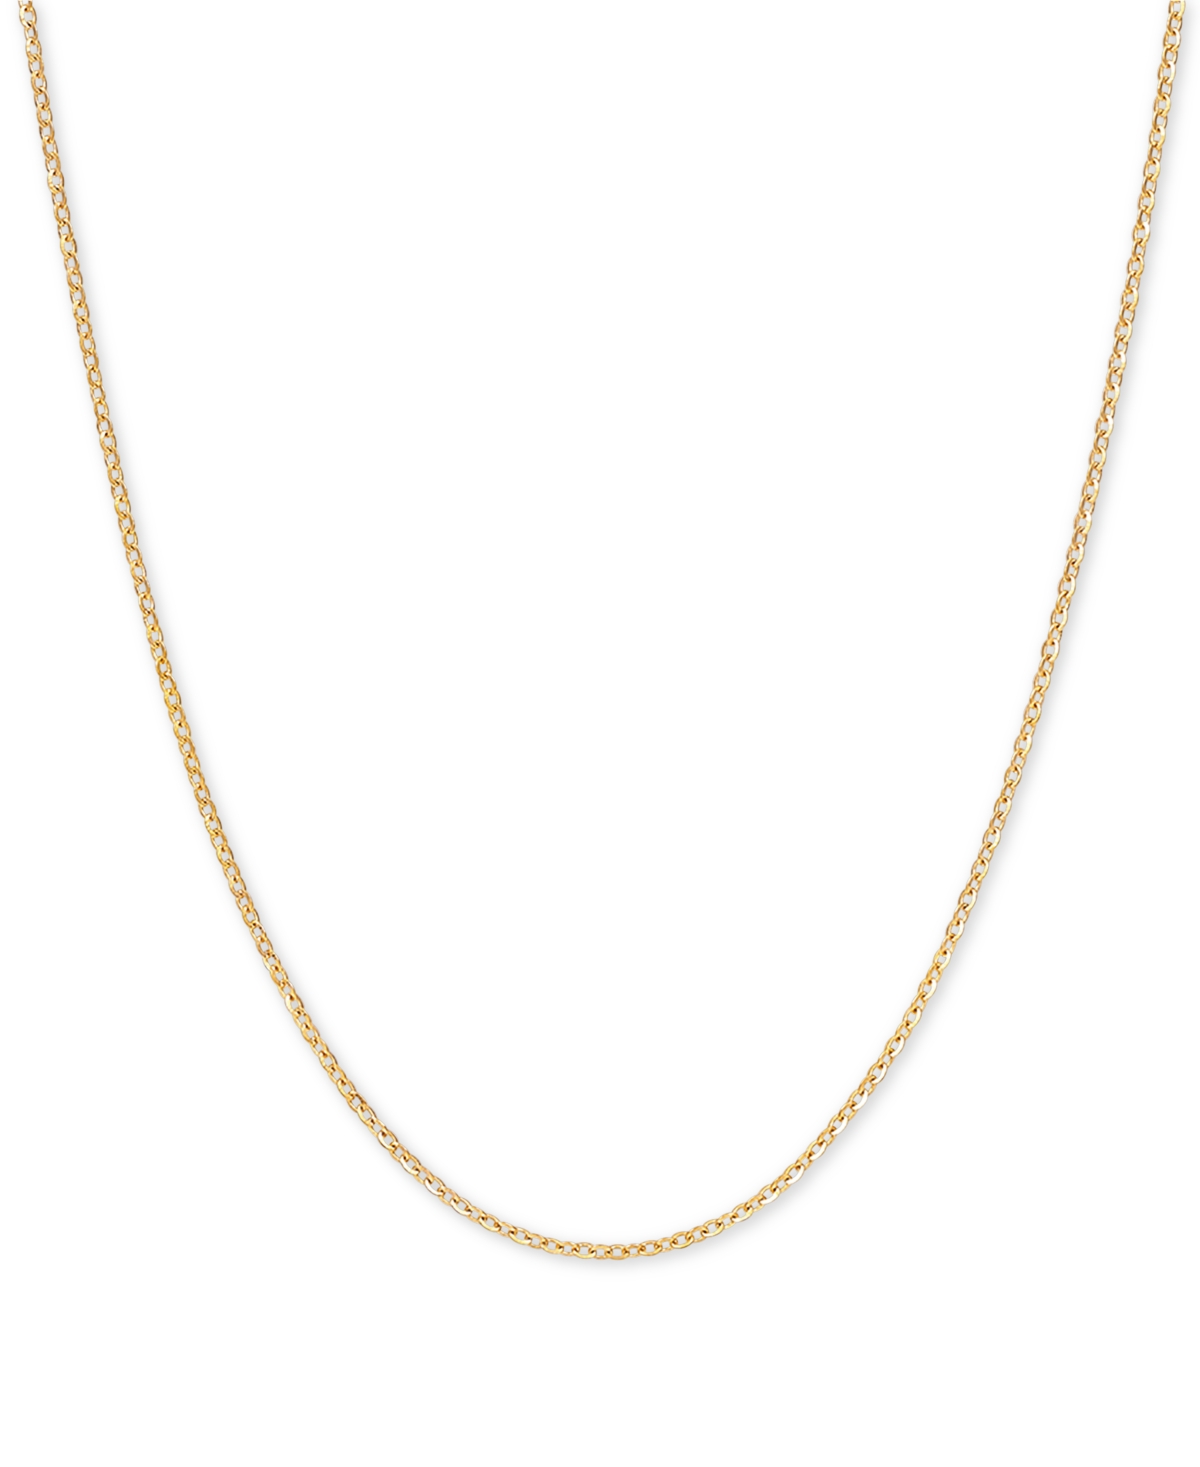 Mirror Cable Link 16" Chain Necklace (1-1/4mm) in 14k Gold - Yellow Gold